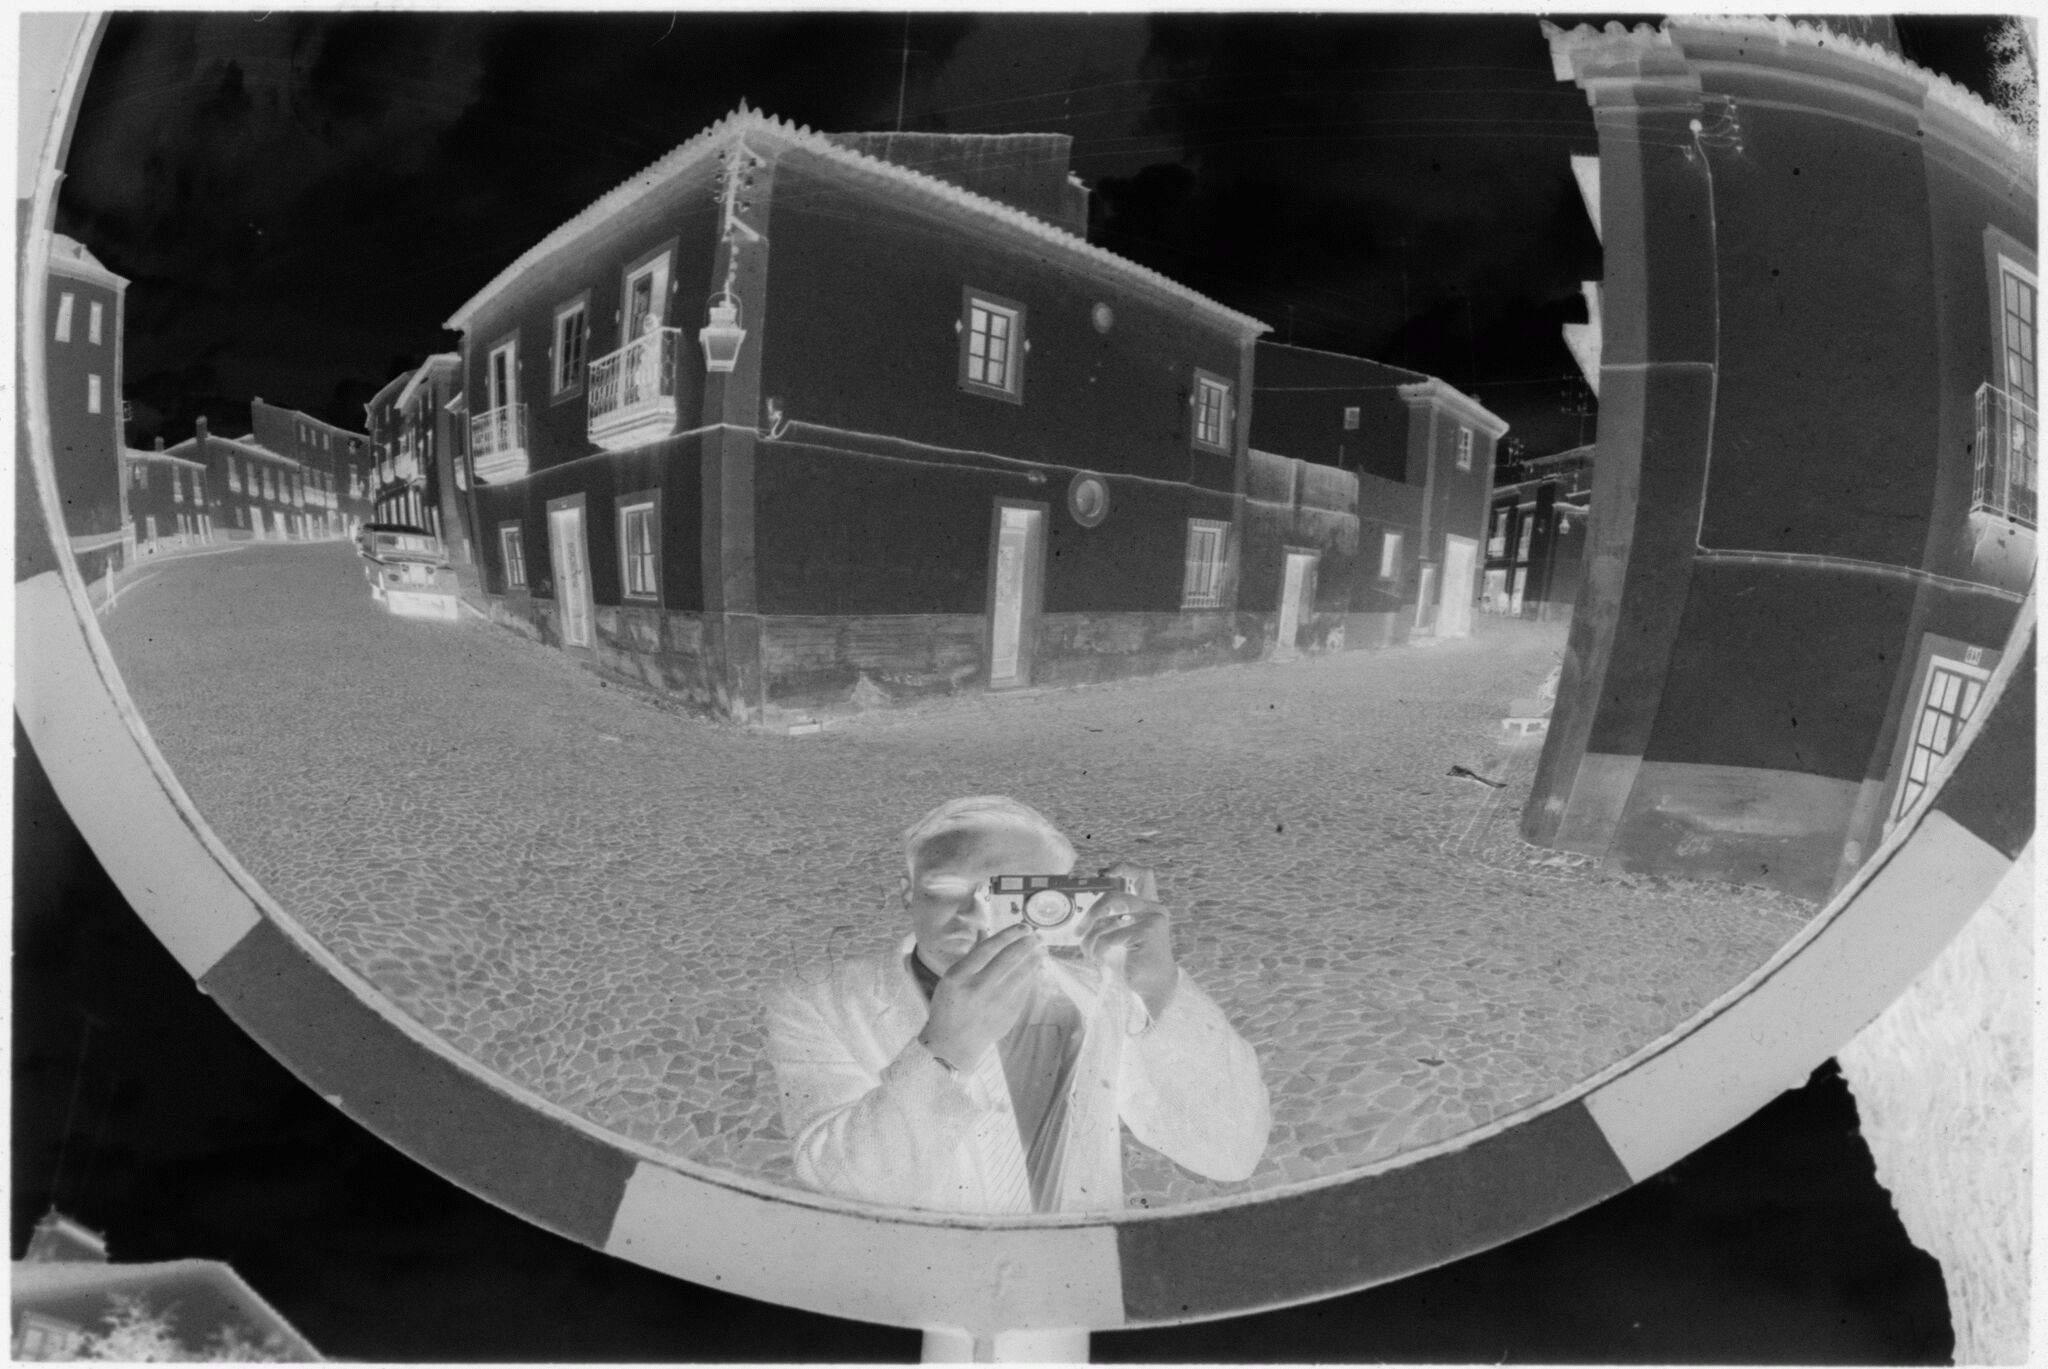 Untitled (Reflection Of Gordon Gahan And The Intersection Of Stone Streets In Convex Mirror, Nazaré, Portugal)